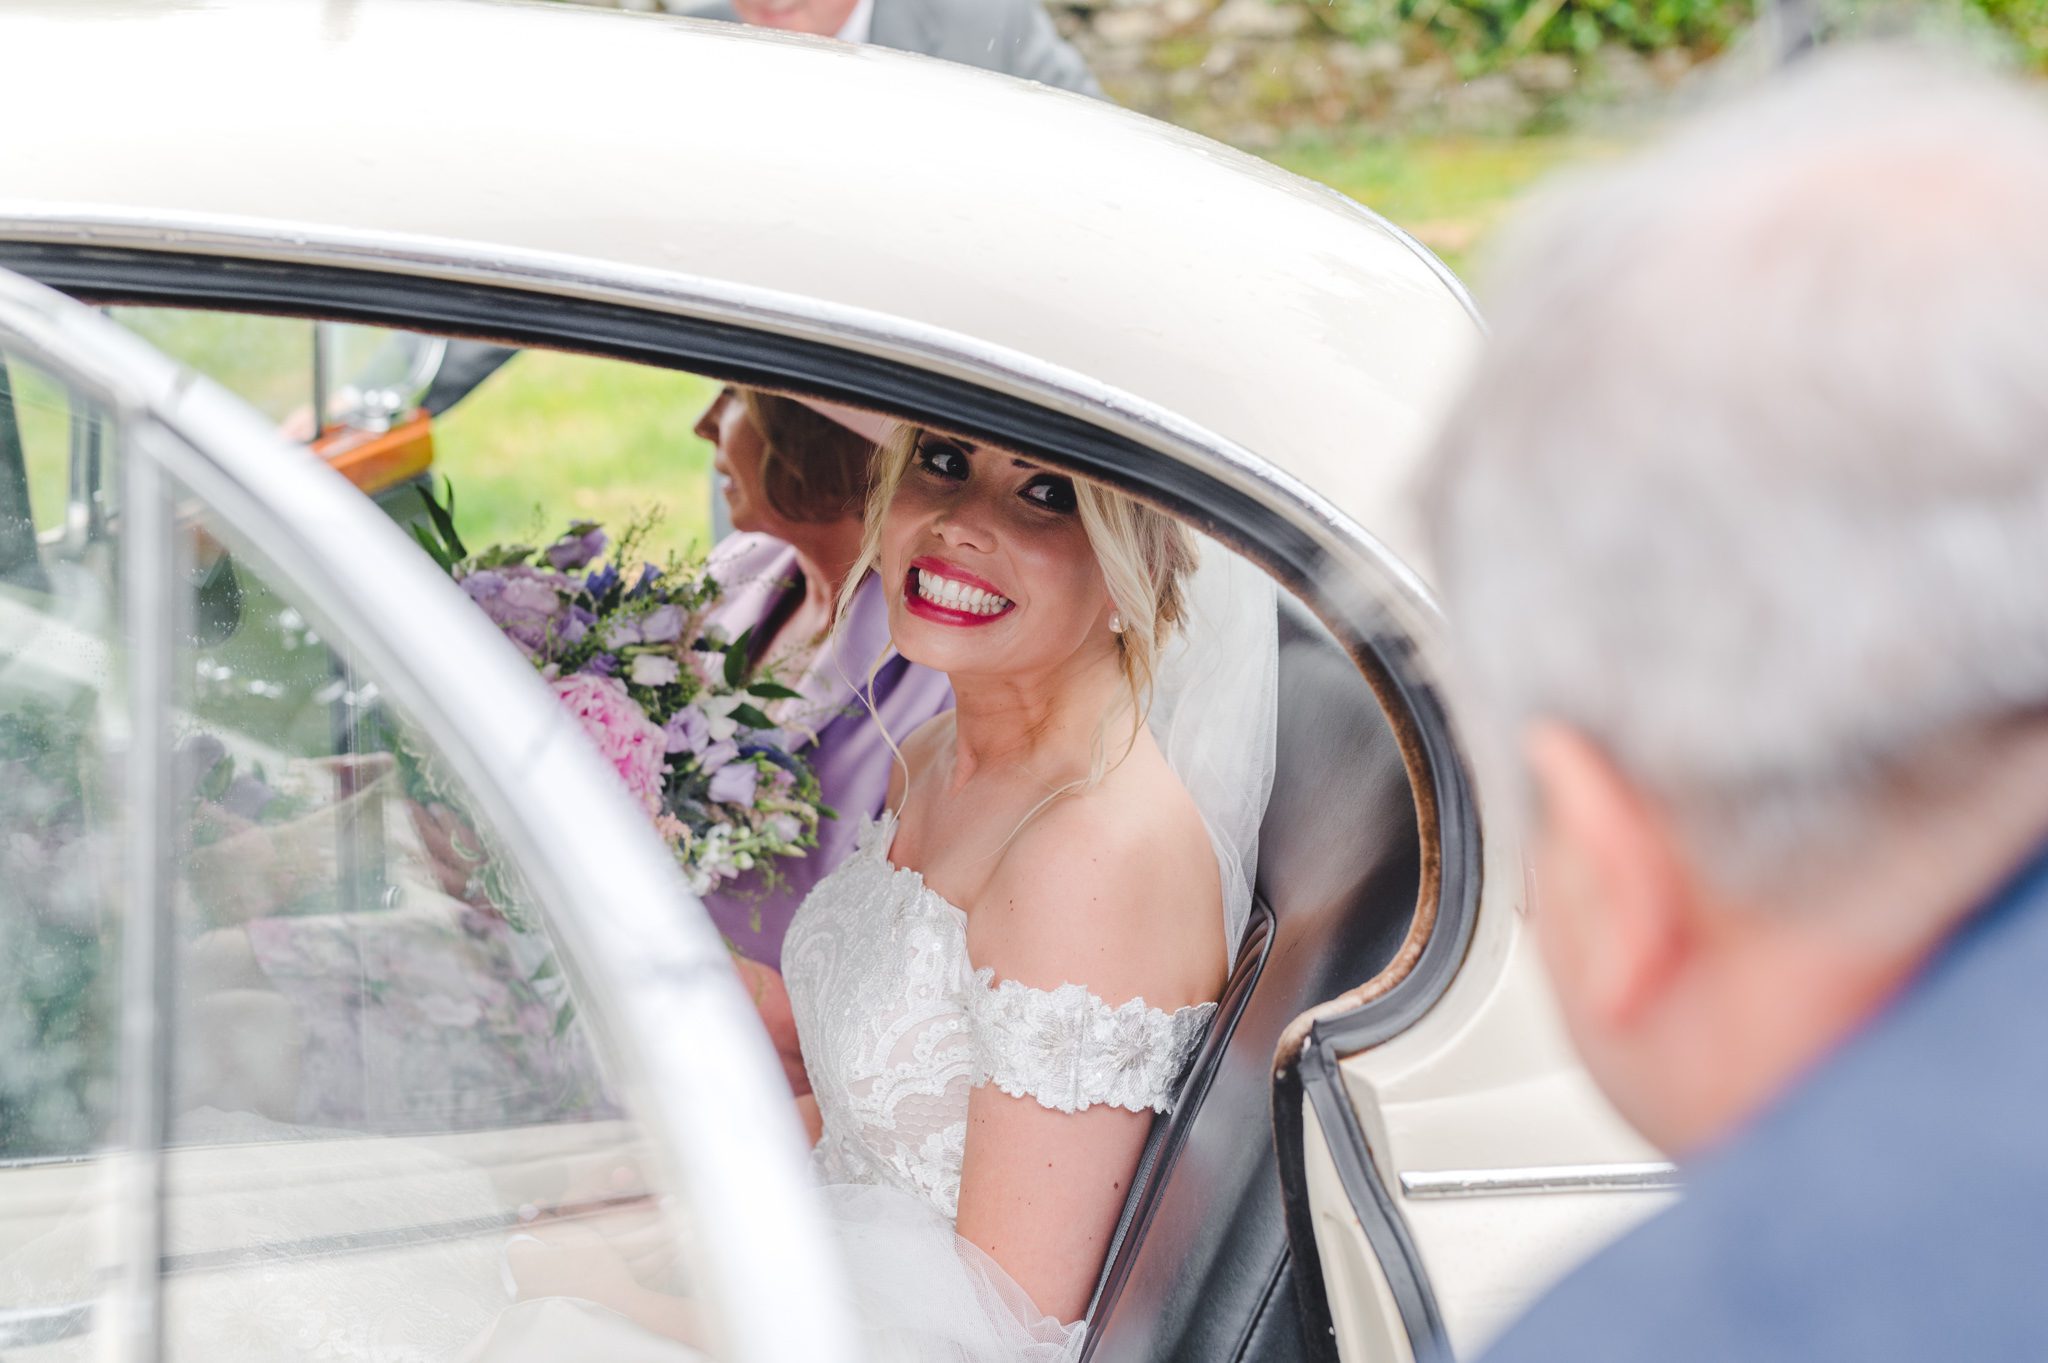 A bride getting out of her car ahead of her wedding ceremony